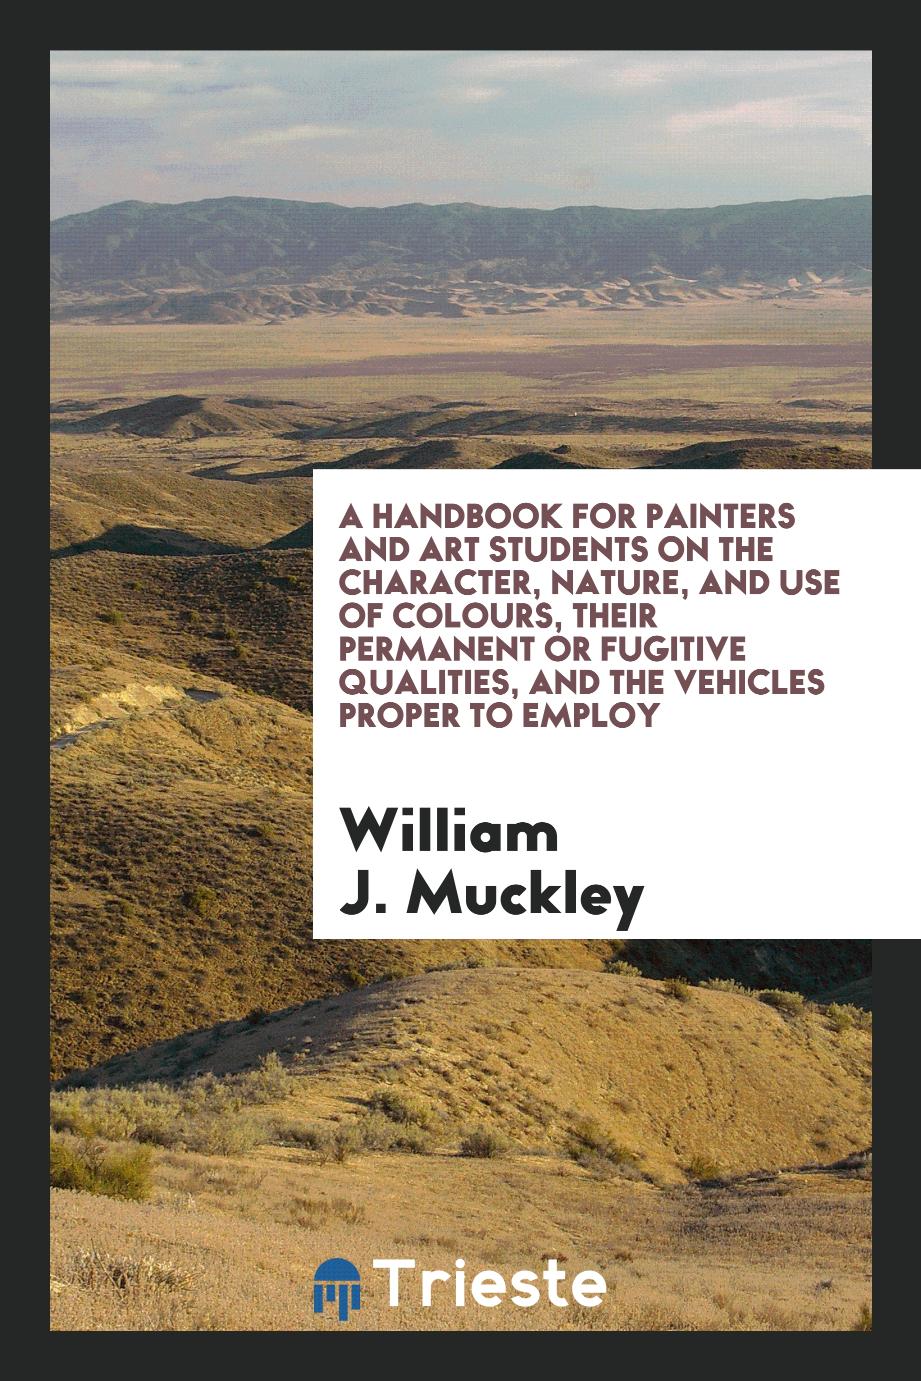 A Handbook for Painters and Art Students on the Character, Nature, and Use of Colours, Their Permanent or Fugitive Qualities, and the Vehicles Proper to Employ